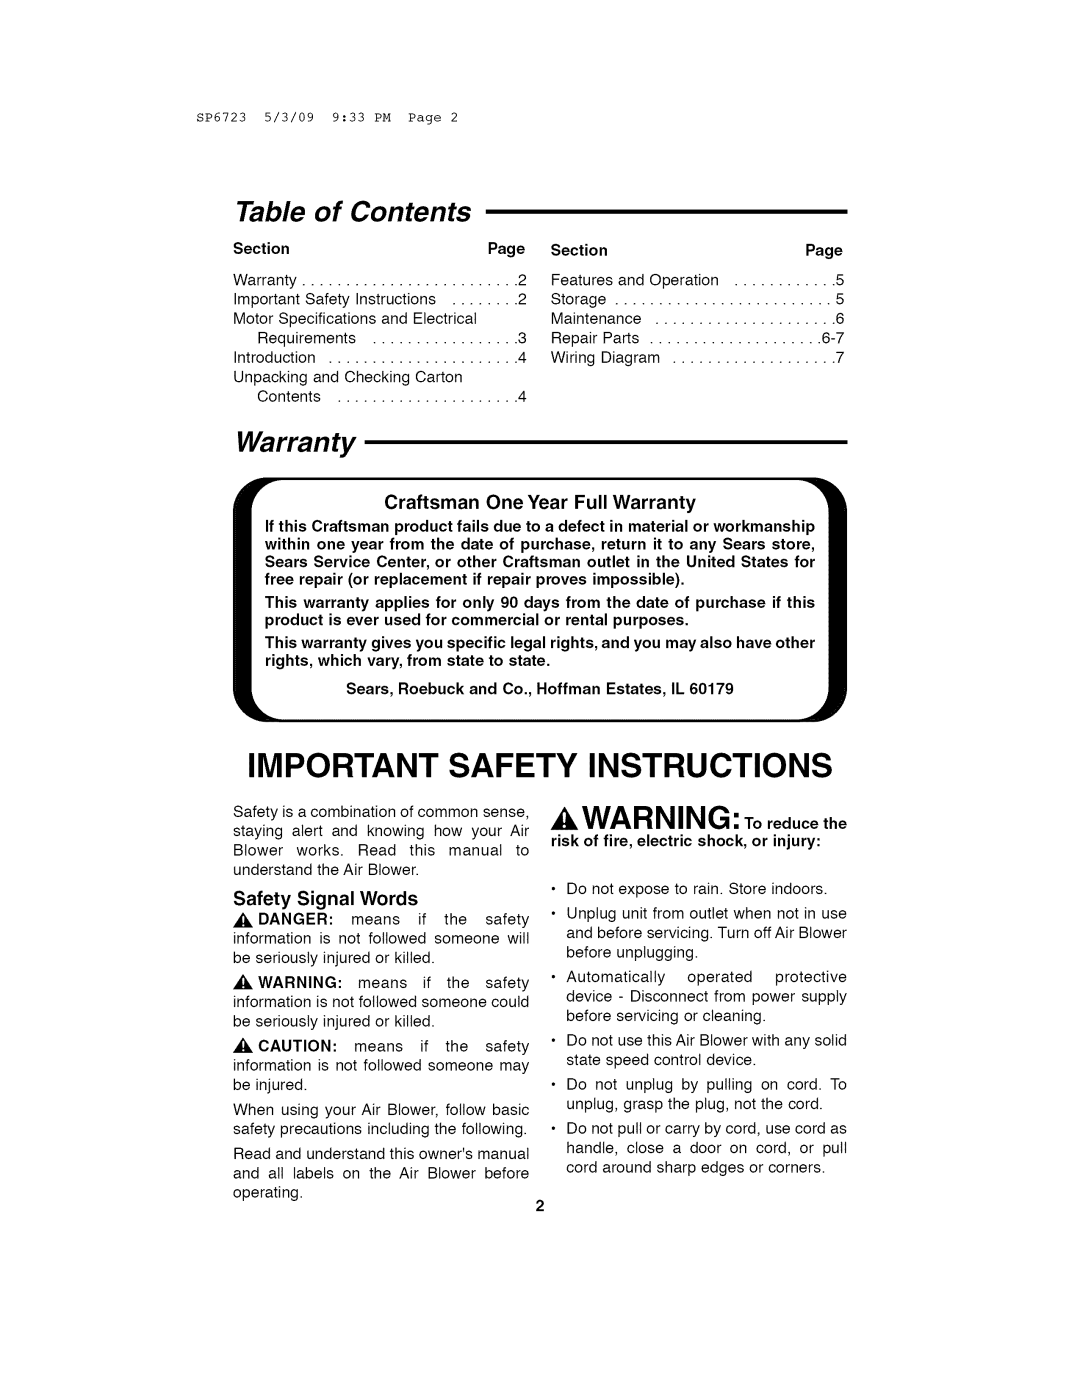 Univex 113.171500 Important Safety Instructions, A WARNING: Toreducethe, Table of Contents, Warranty, Craftsman 